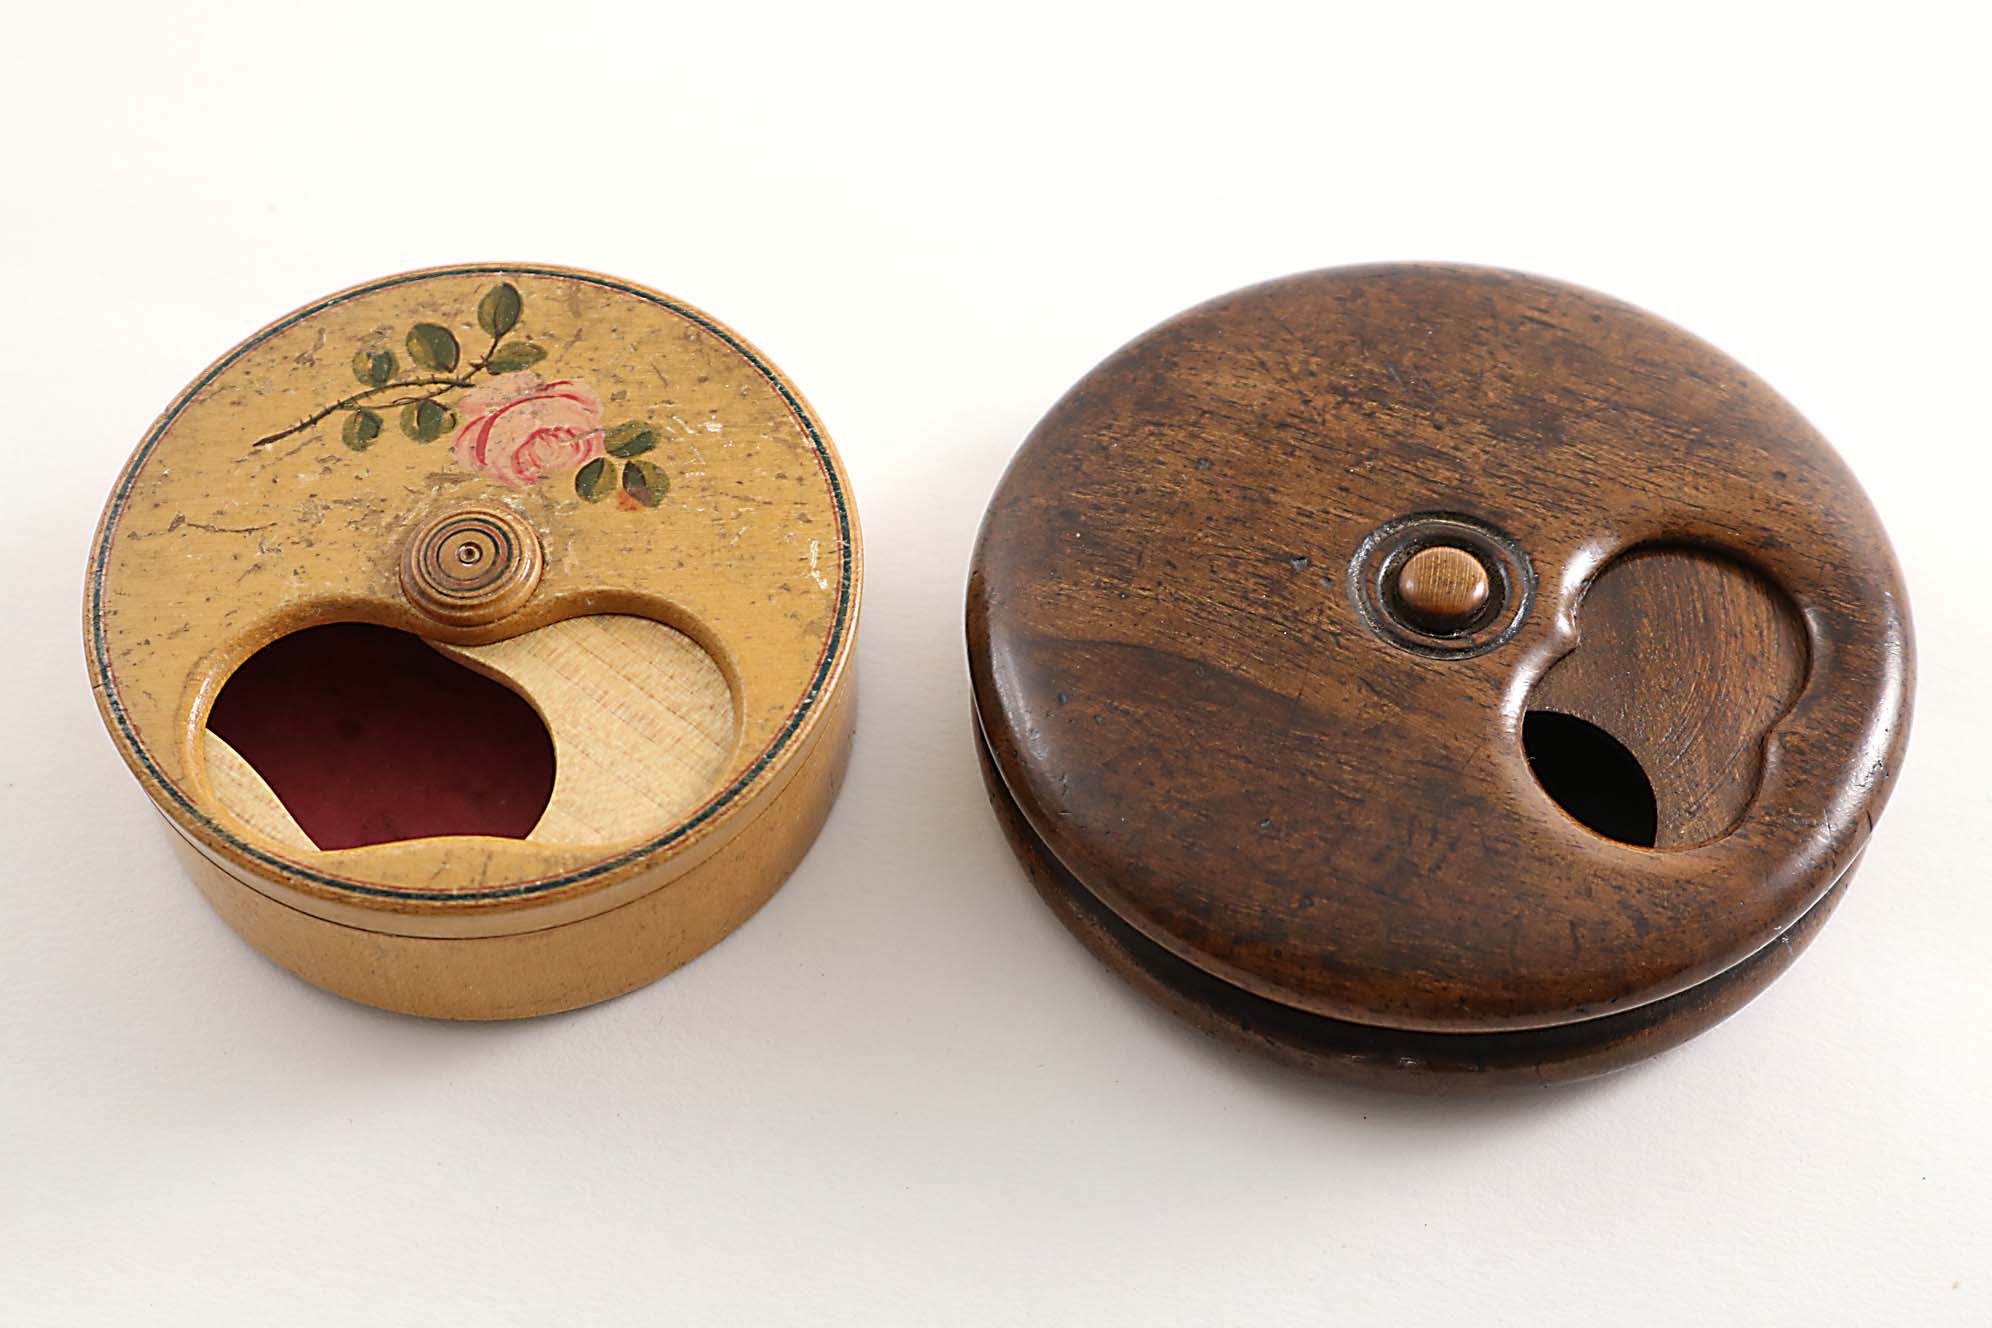 AN EARLY 19TH CENTURY CIRCULAR PALE WOODEN "MISER'S"SNUFF BOX painted with flowers (paper lining),